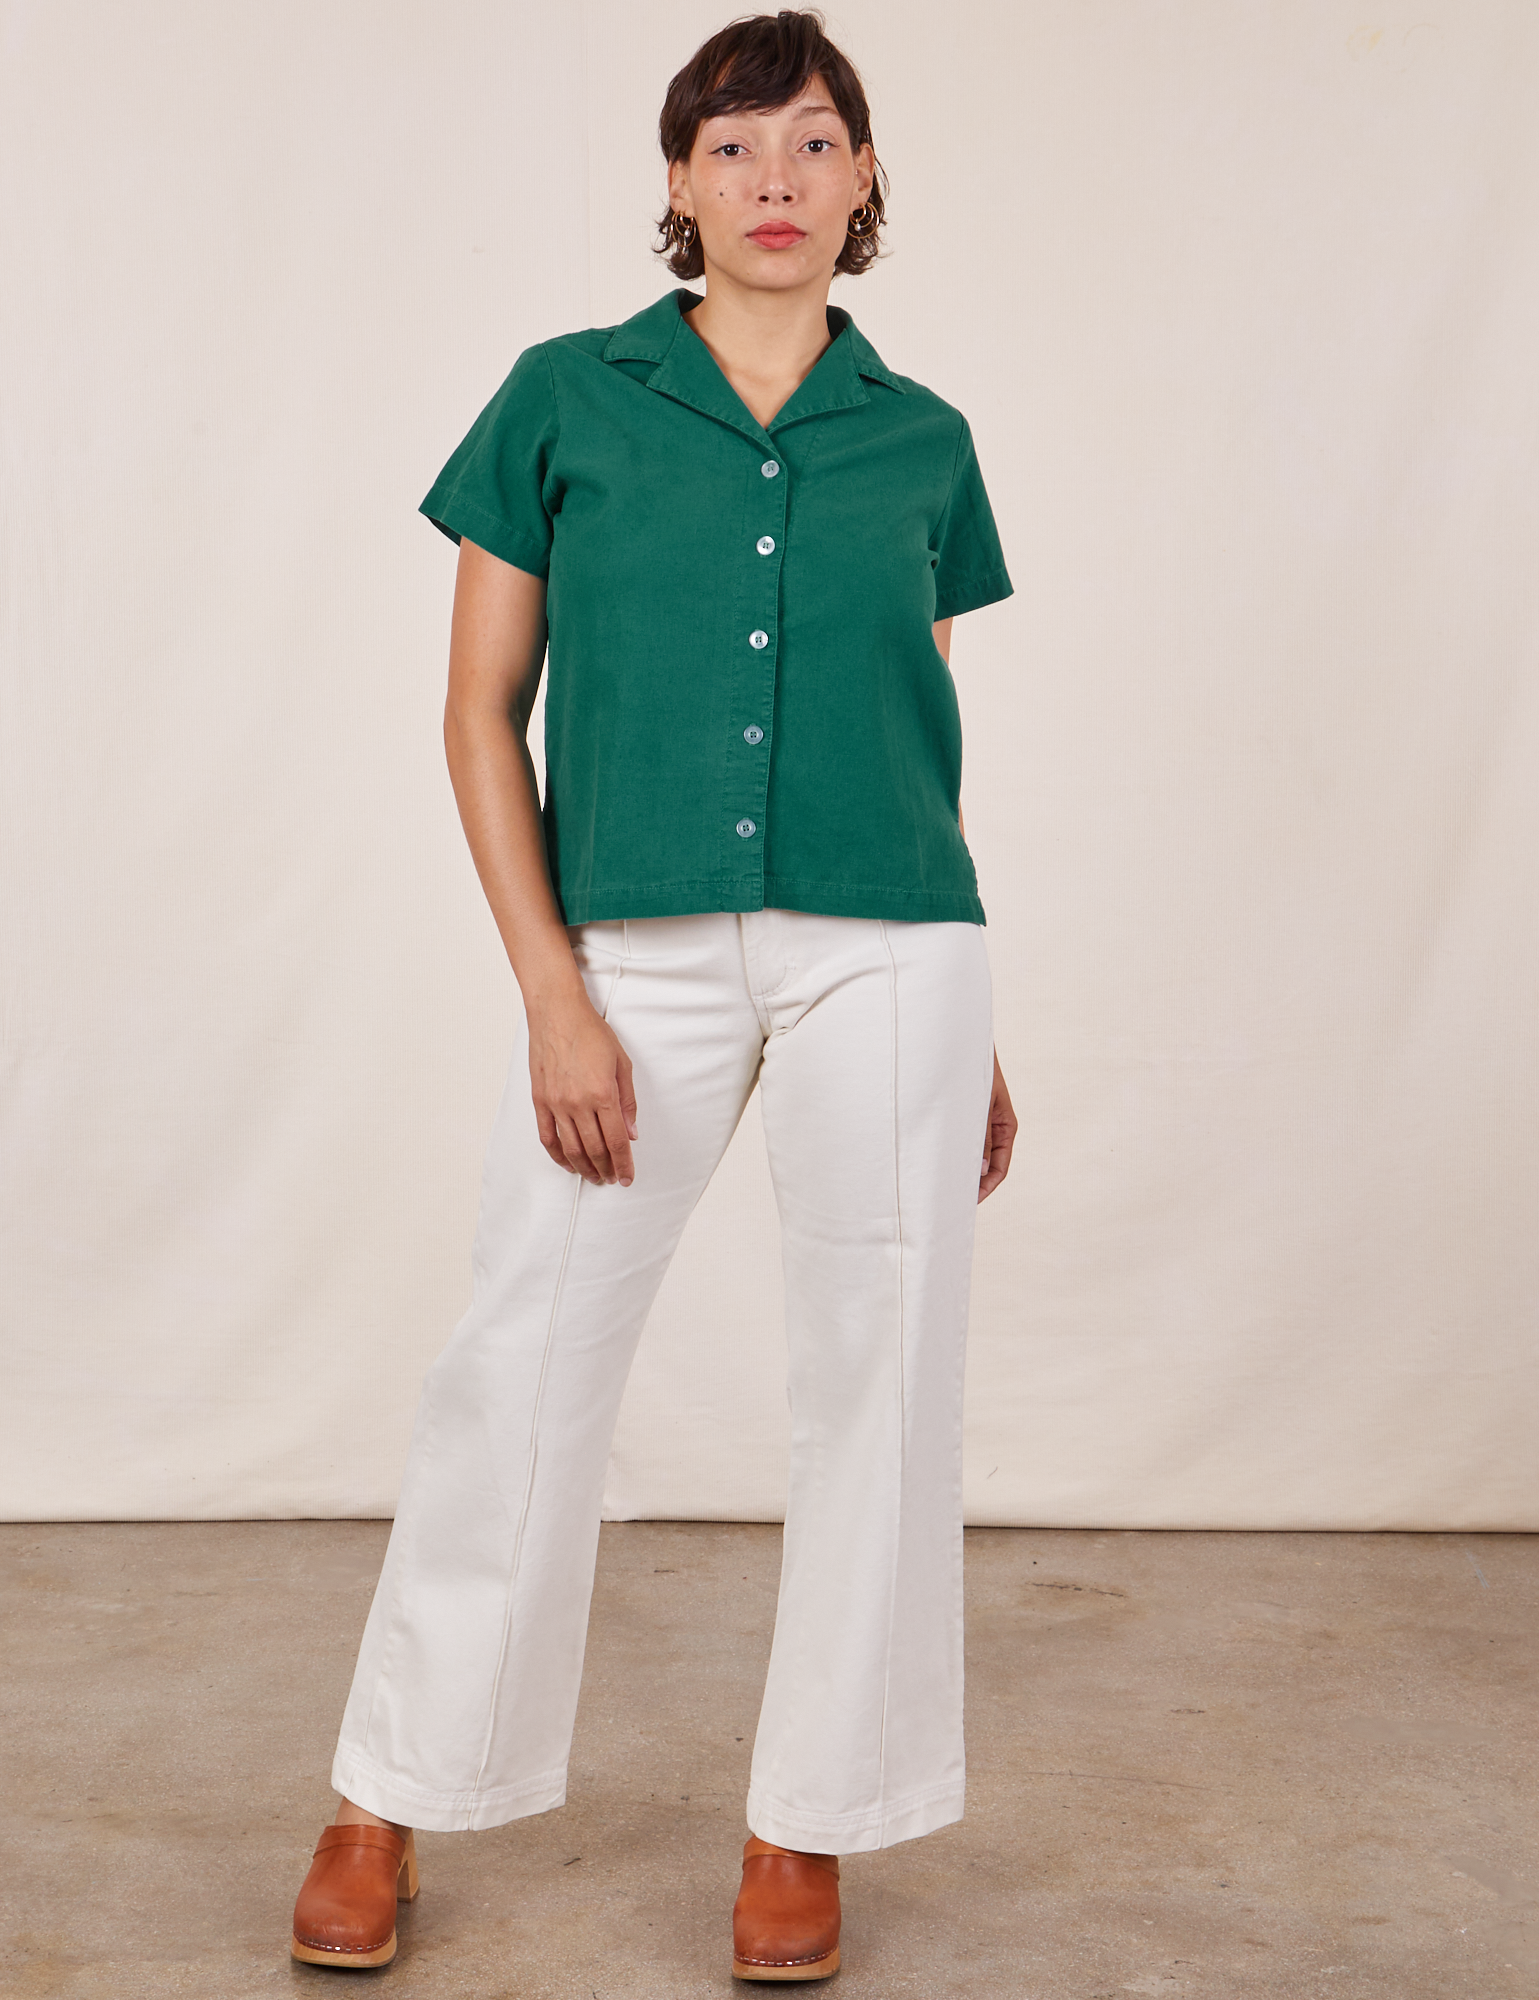 Tiara is wearing size XS Pantry Button-Up in Hunter Green paired with vintage tee off-white Western Pants